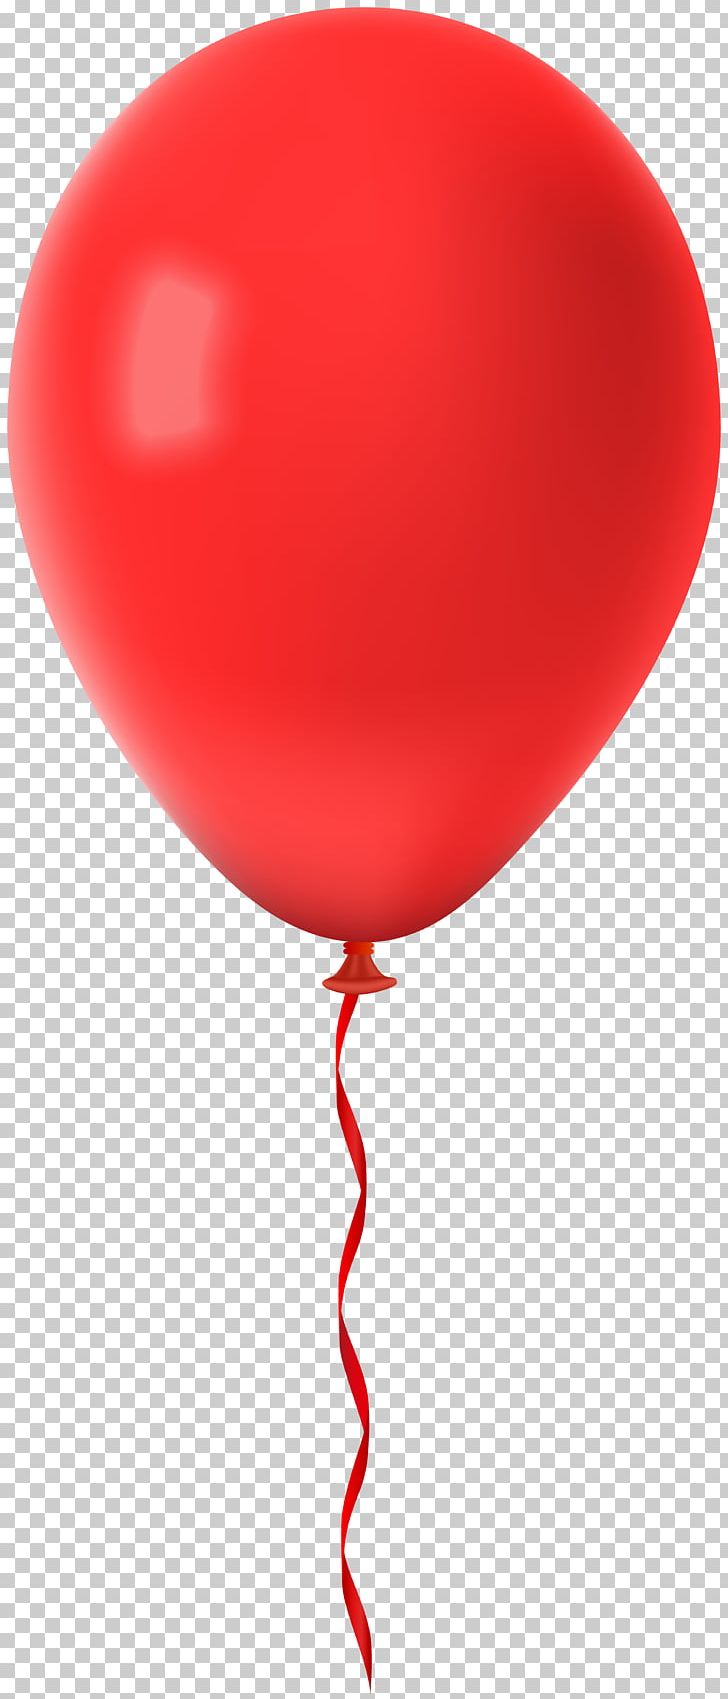 Balloon Open Portable Network Graphics PNG, Clipart, Art, Balloon, Collage, Red, Red Balloon Free PNG Download